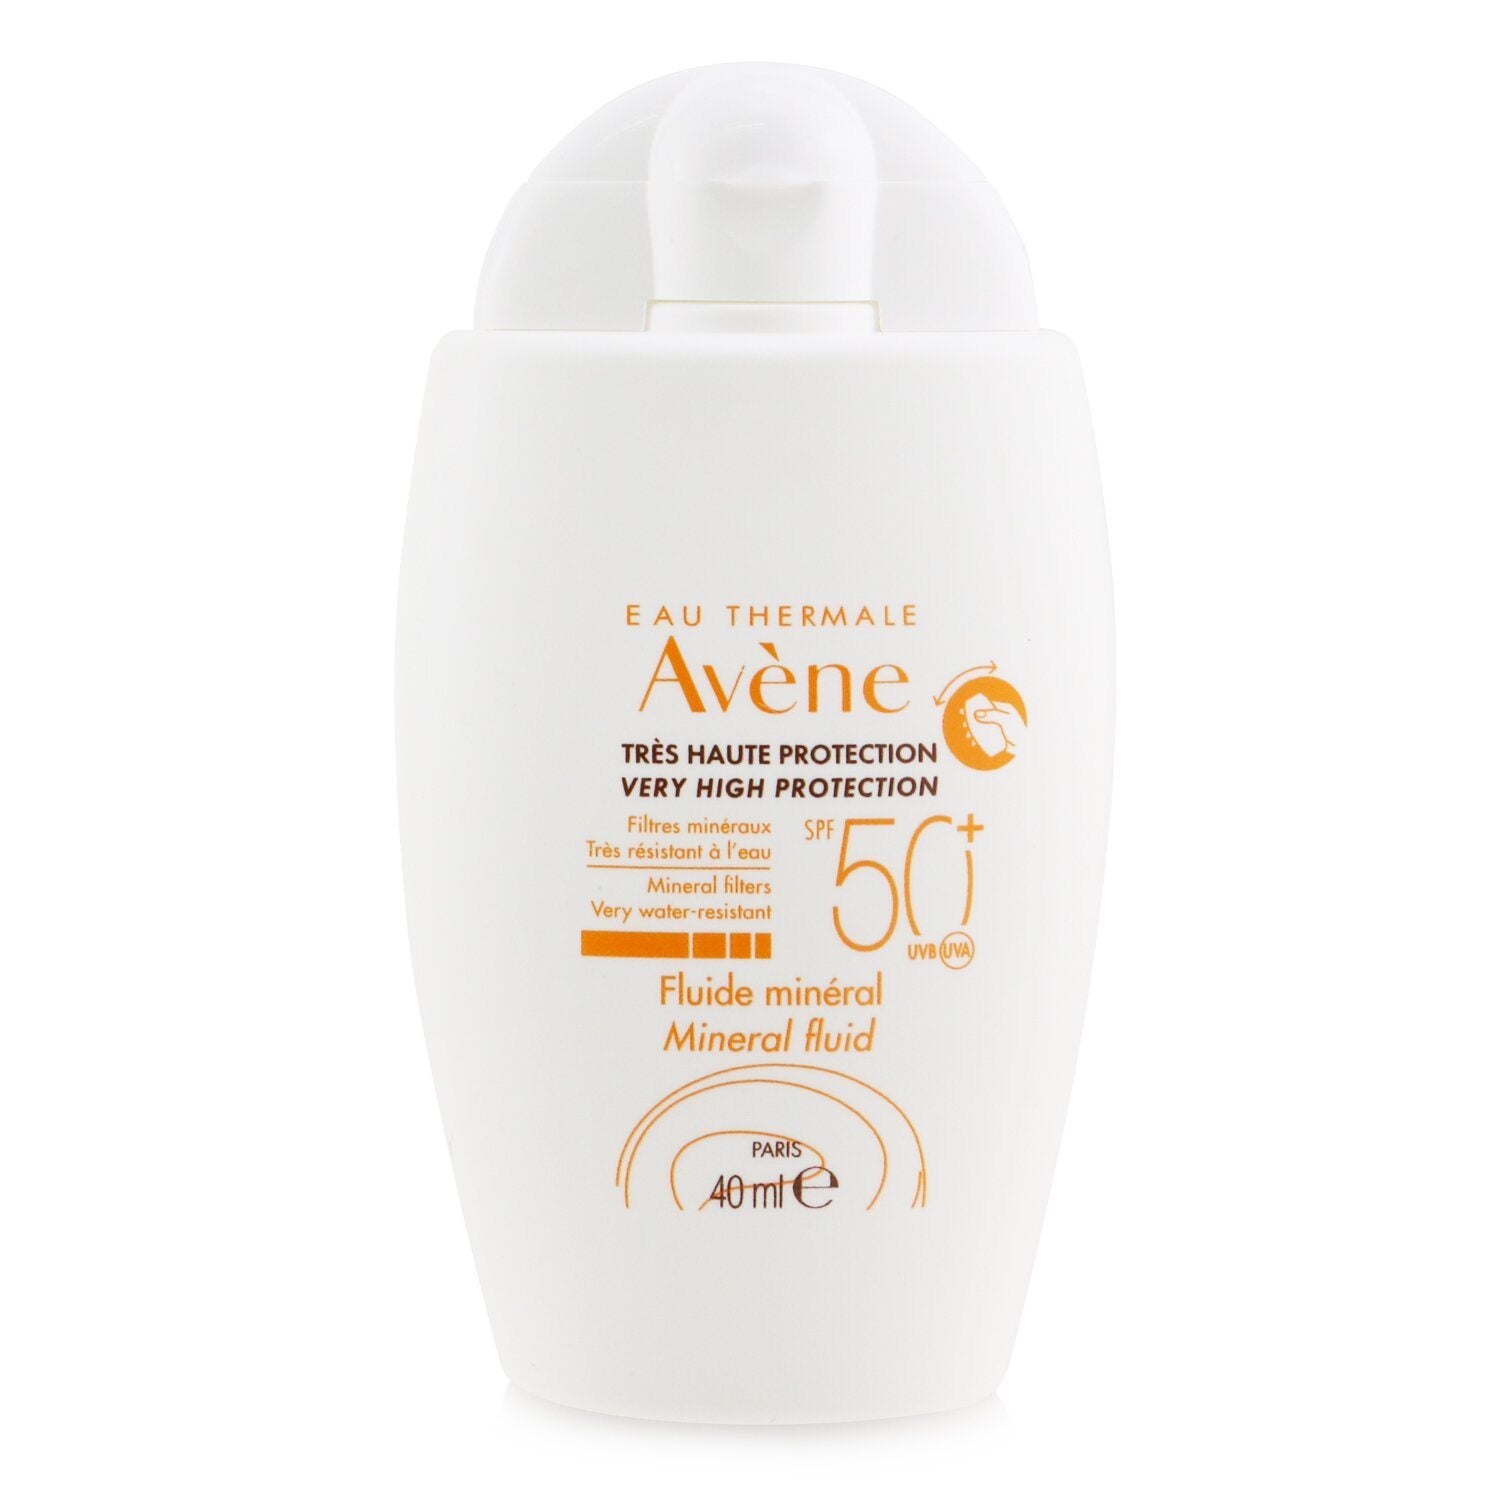 Product Description: Very High Protection Mineral Fluid SPF 50+ sunscreen face lotion is an excellent sun care fluid that provides effective protection against harmful UV rays.